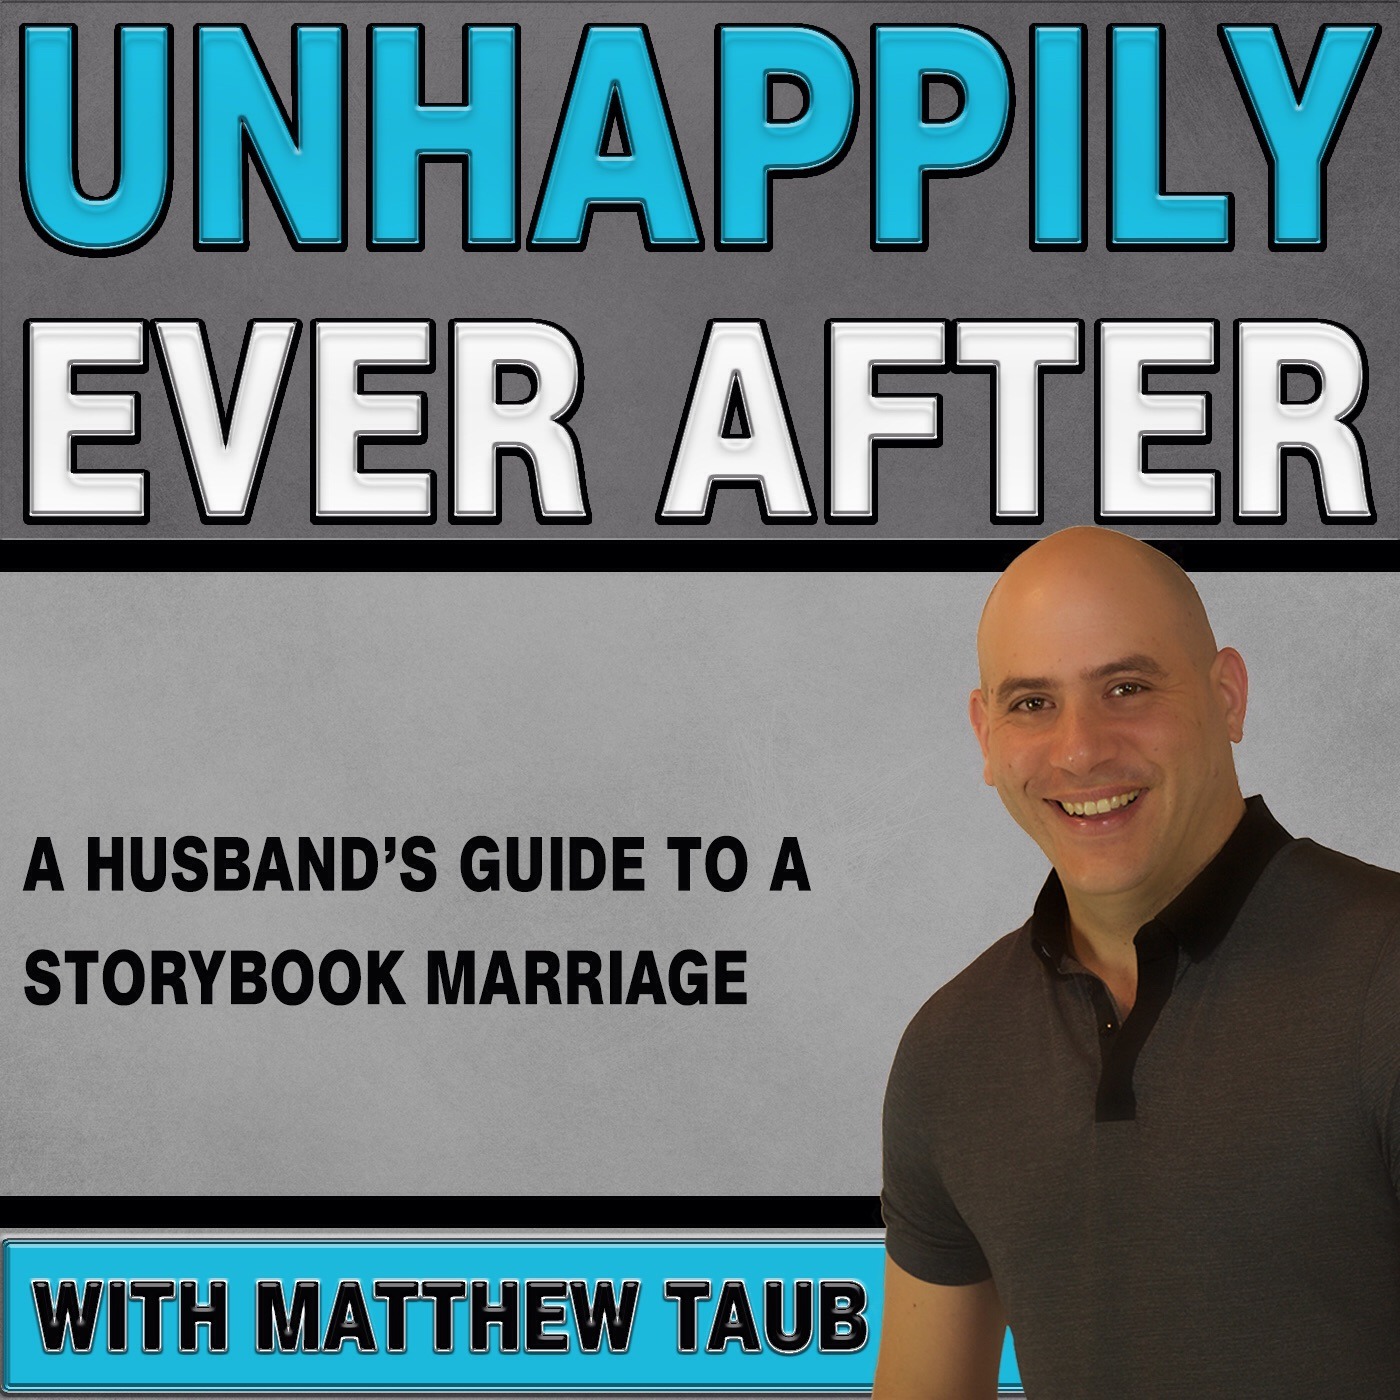 Unhappily Ever After with Matthew Taub